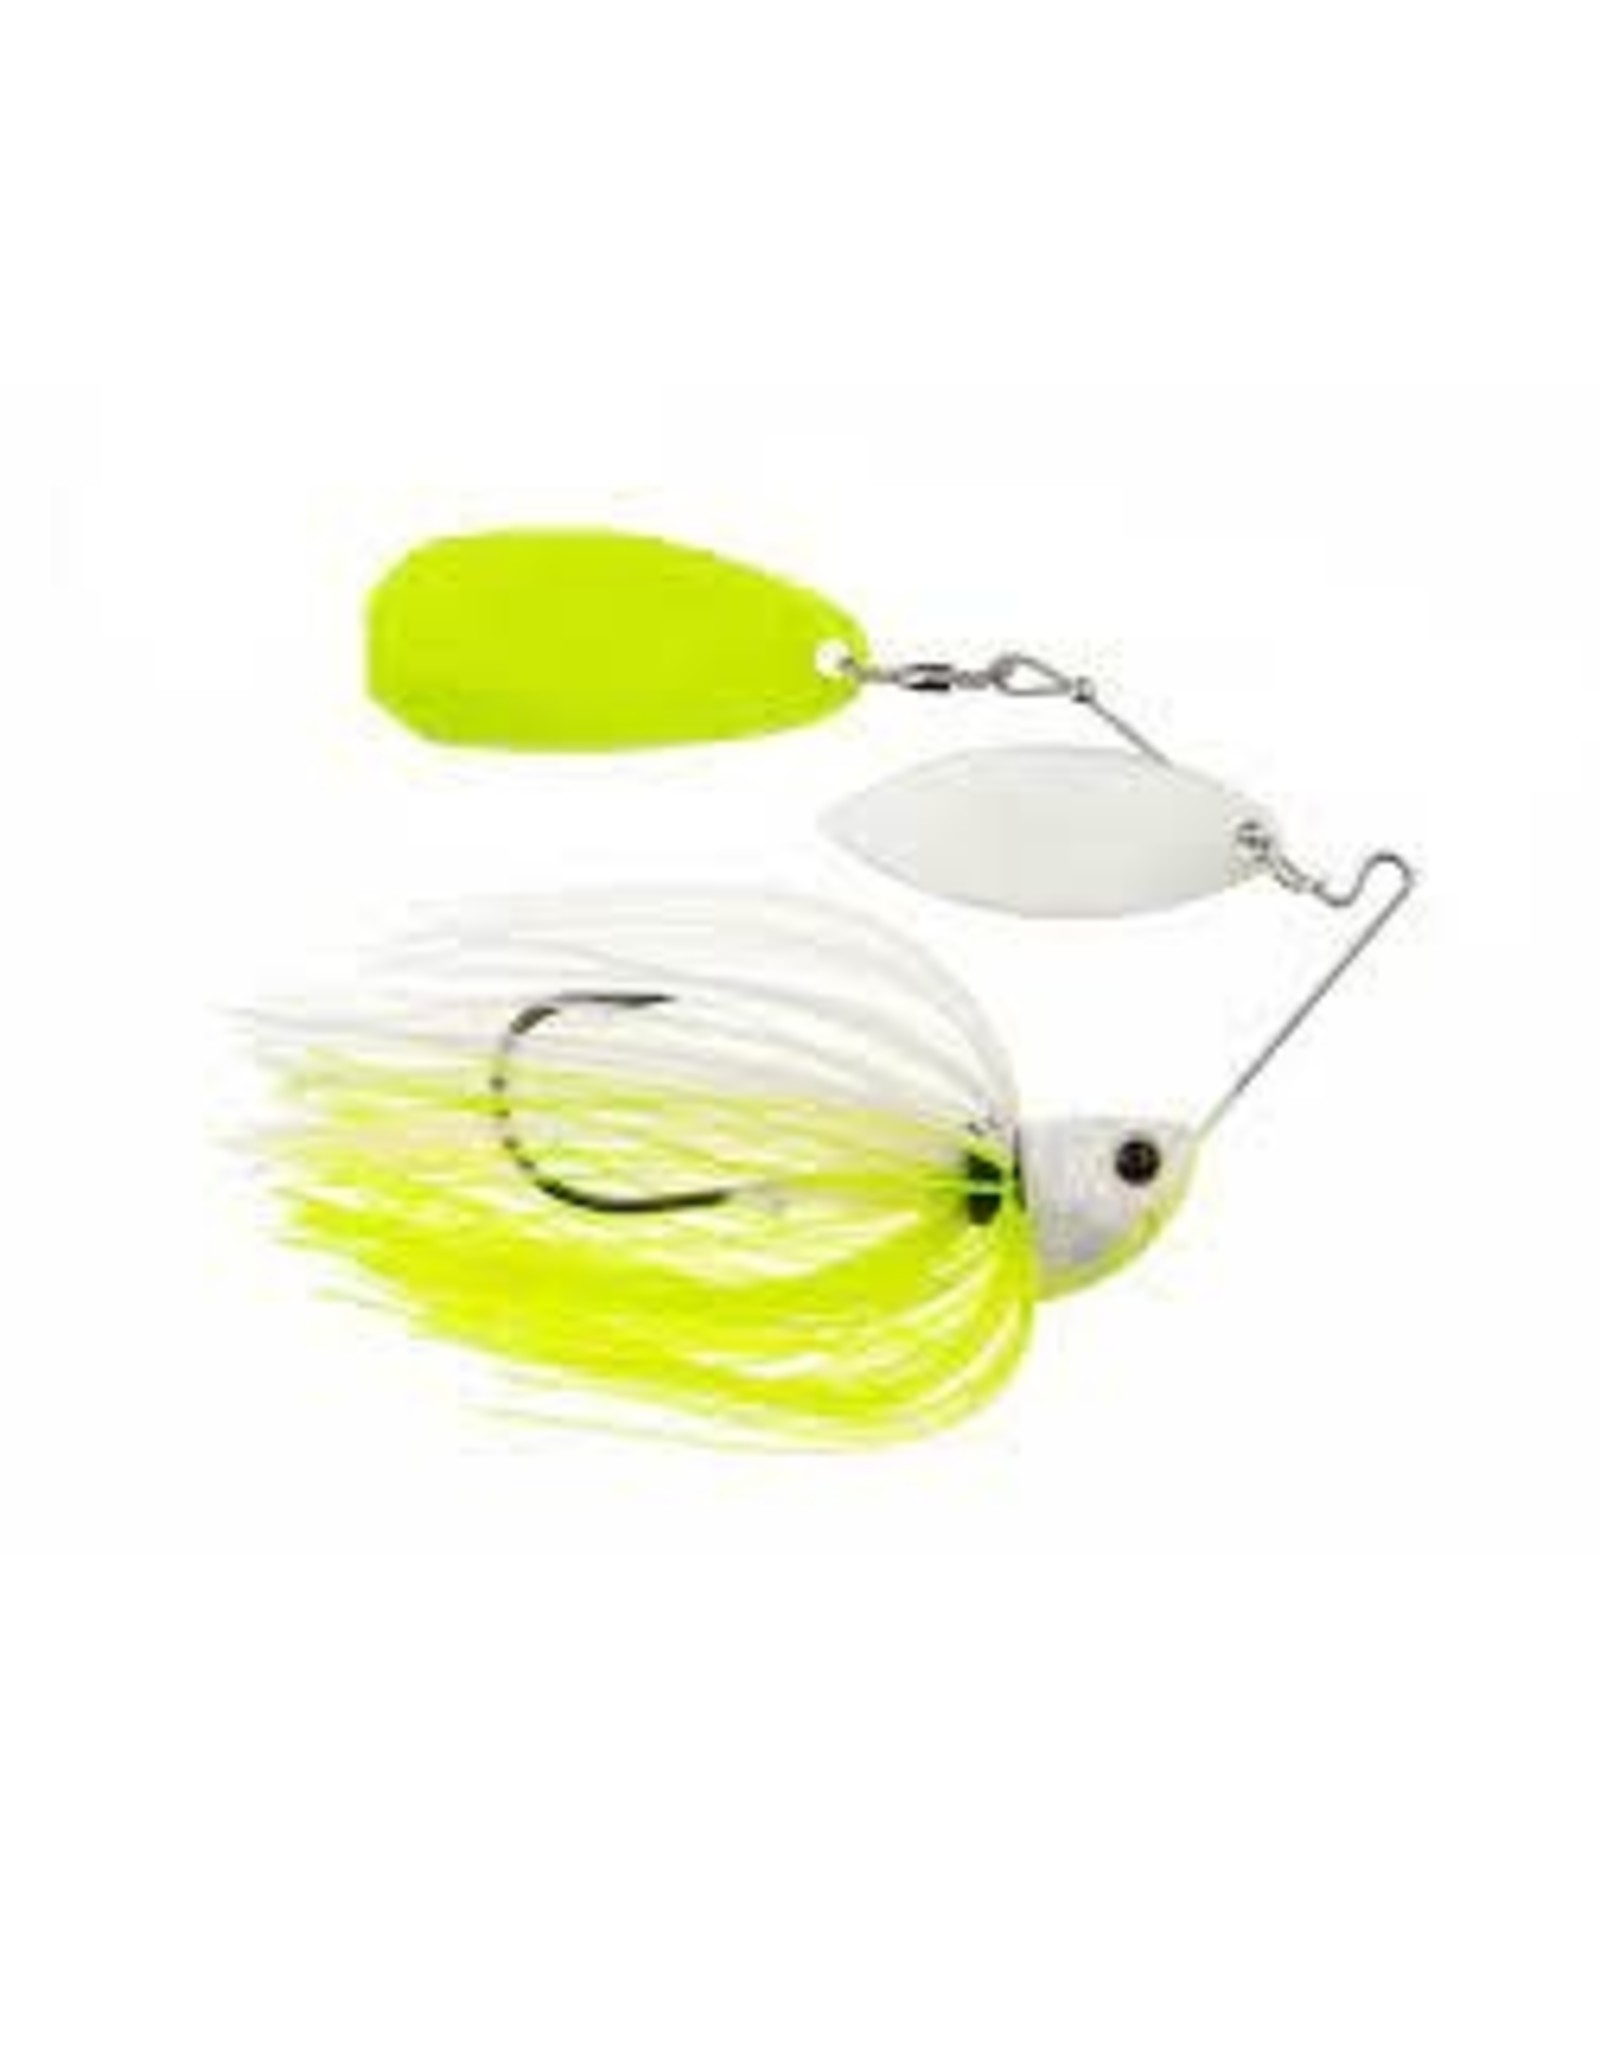 Freedom Freedom Tackle - Speed Freak Full Frame Spinnerbait - Chartreuse Pearl 1/2 oz